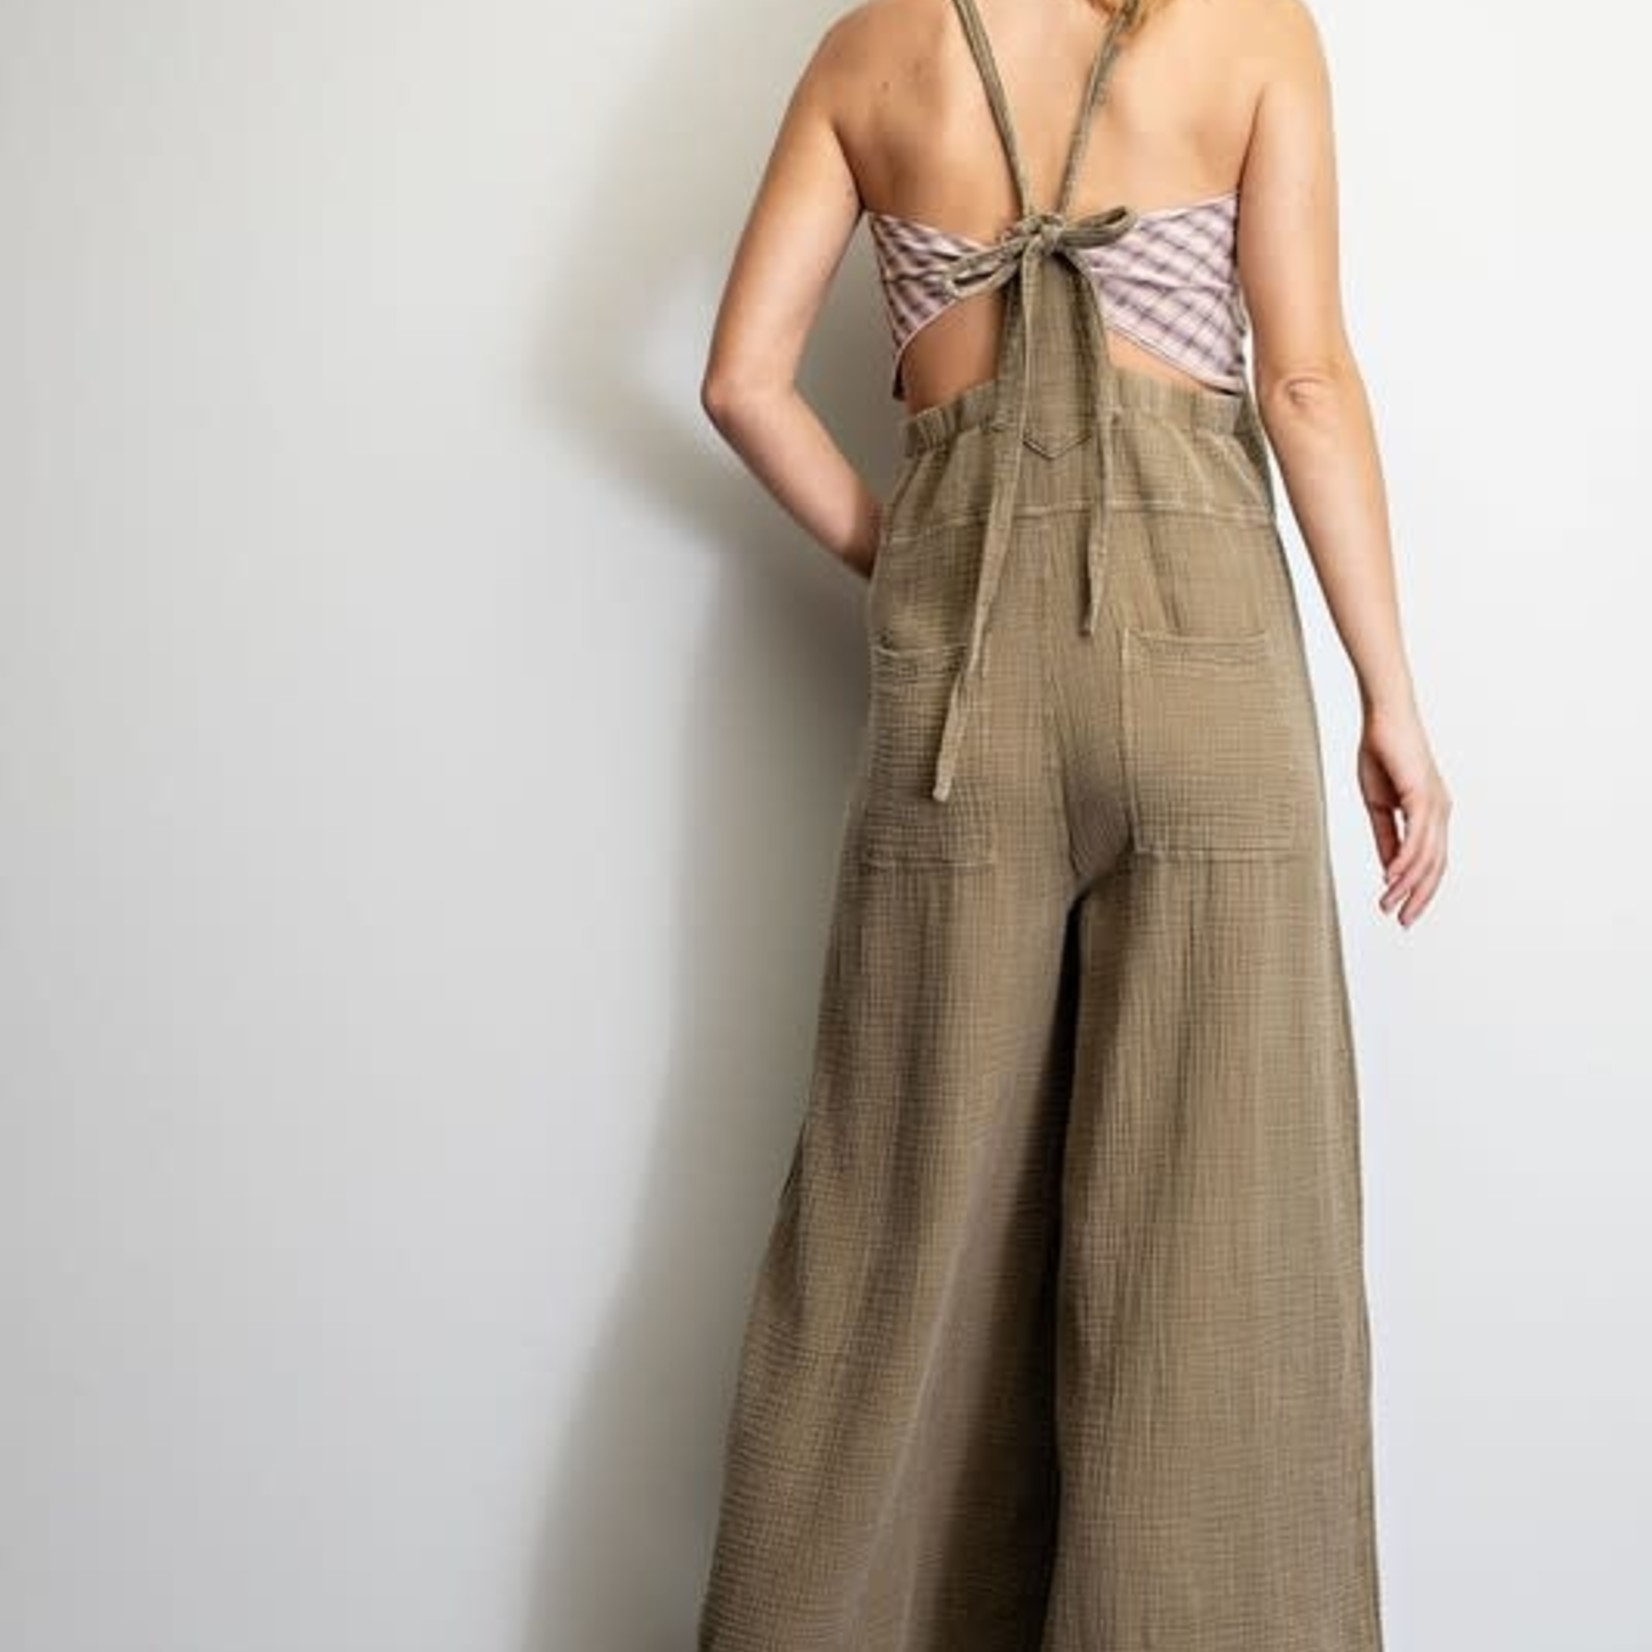 Easel Aribella washed cotton overalls